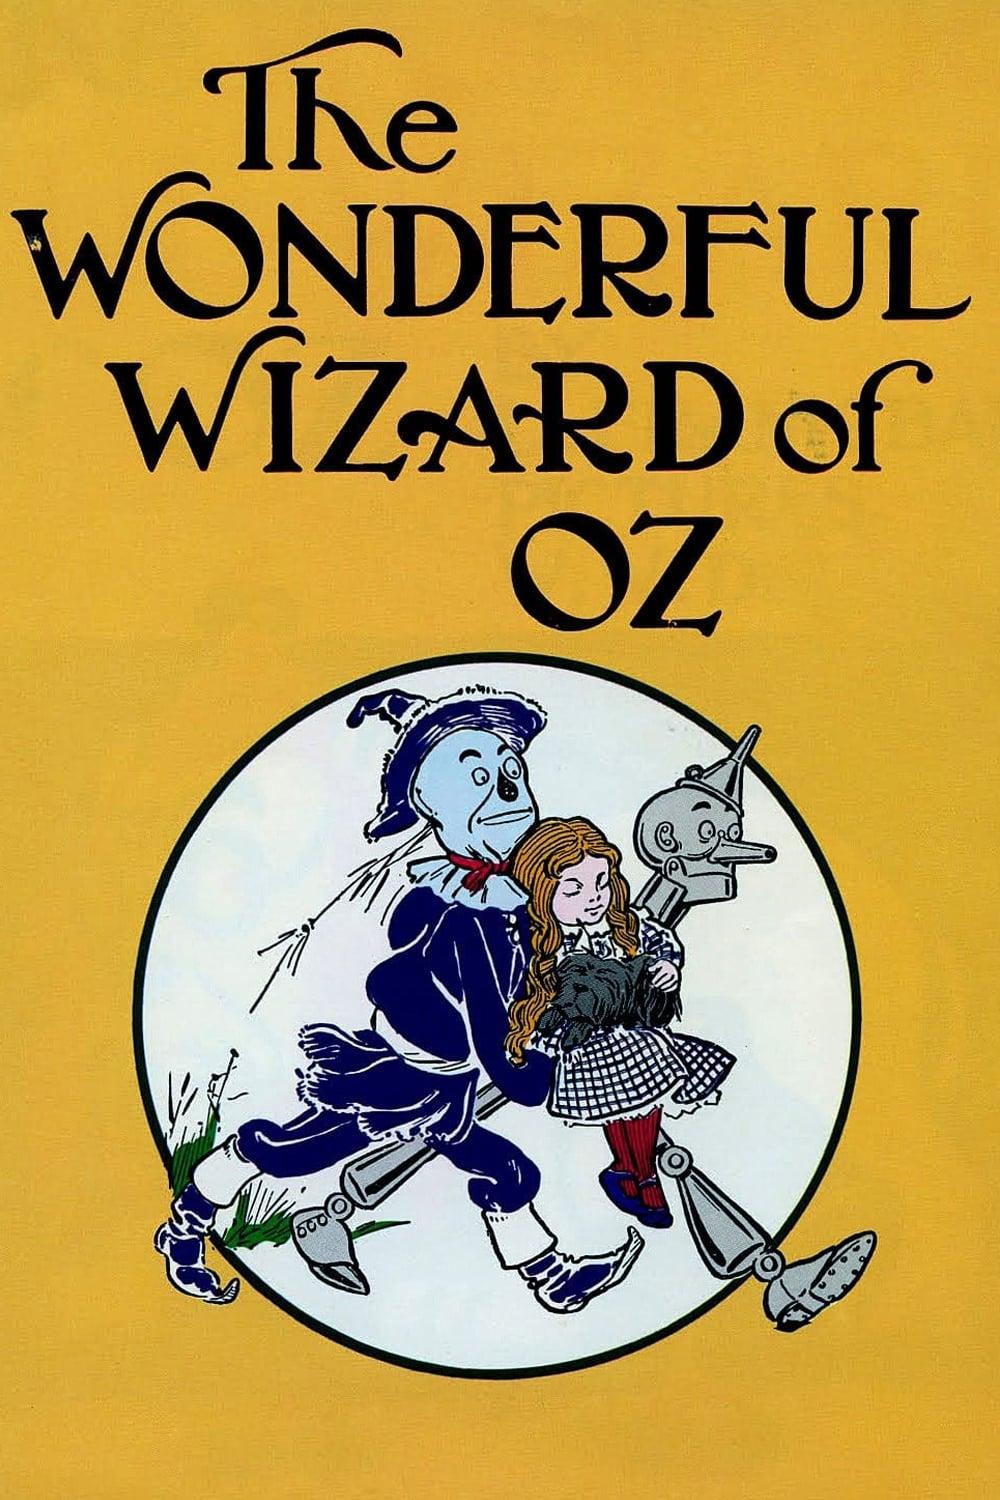 The Wonderful Wizard of Oz poster